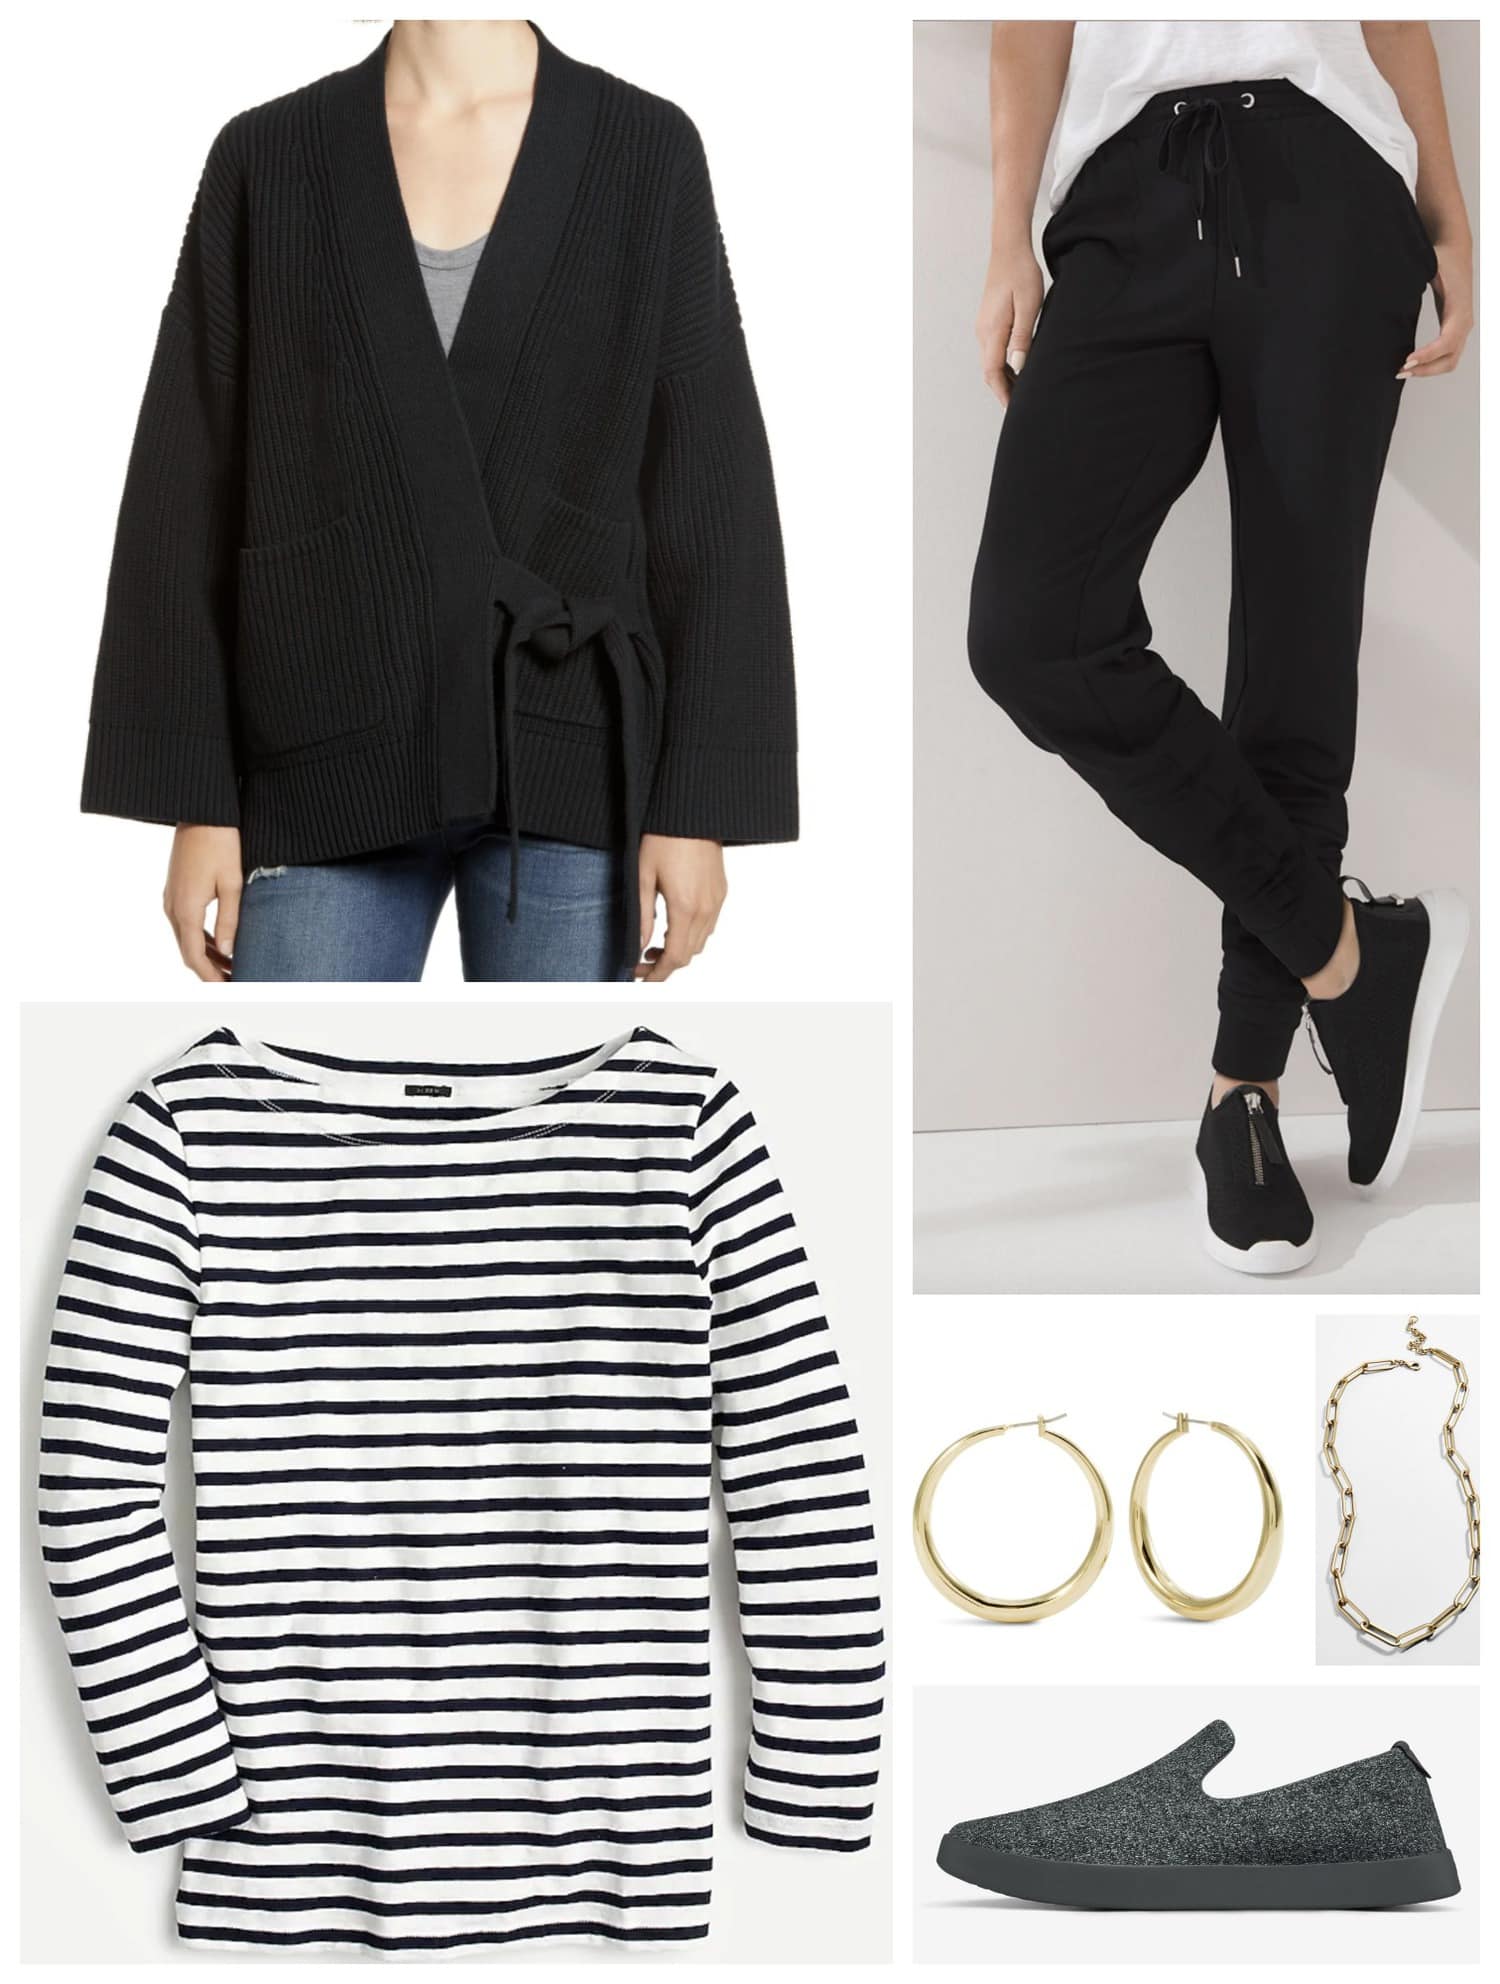 French Chic Casual pairing a breton tee with cozy knit joggers